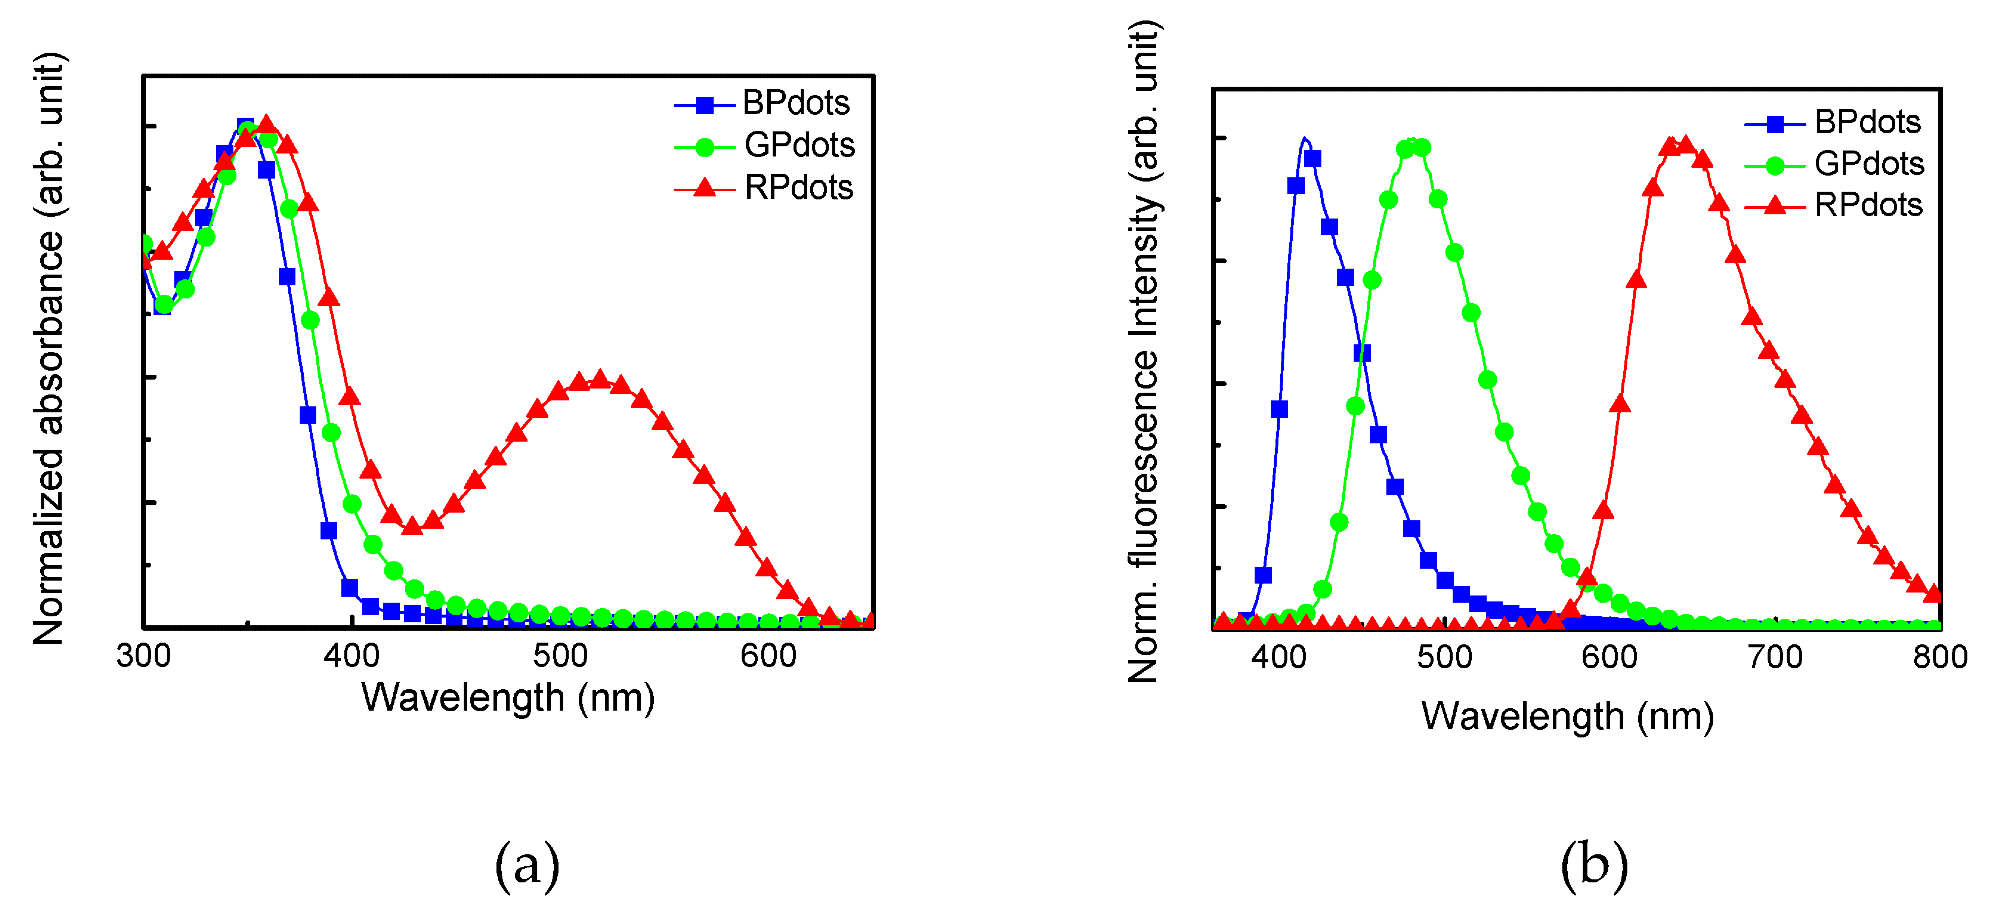 (a) UV-vis and (b) fluorescence spectra of Pdots in water. Excitation wavelength 350 nm.